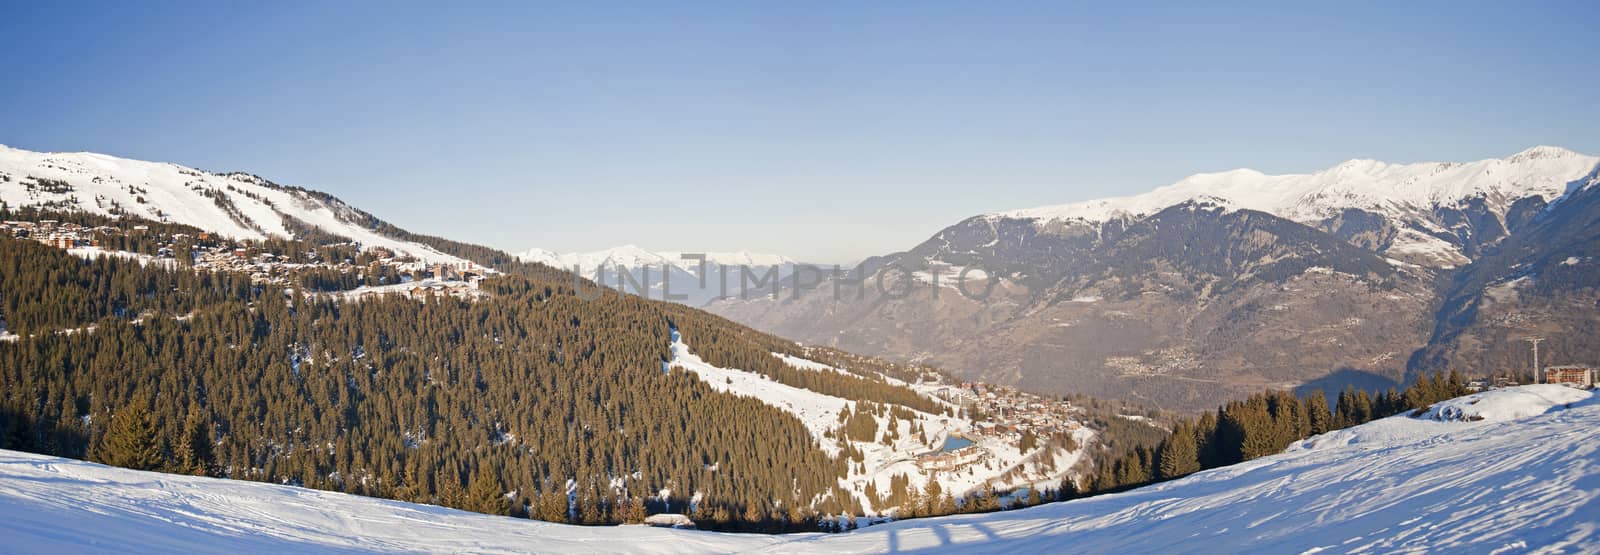 Panoramic view of a snow covered mountain range looking down valley